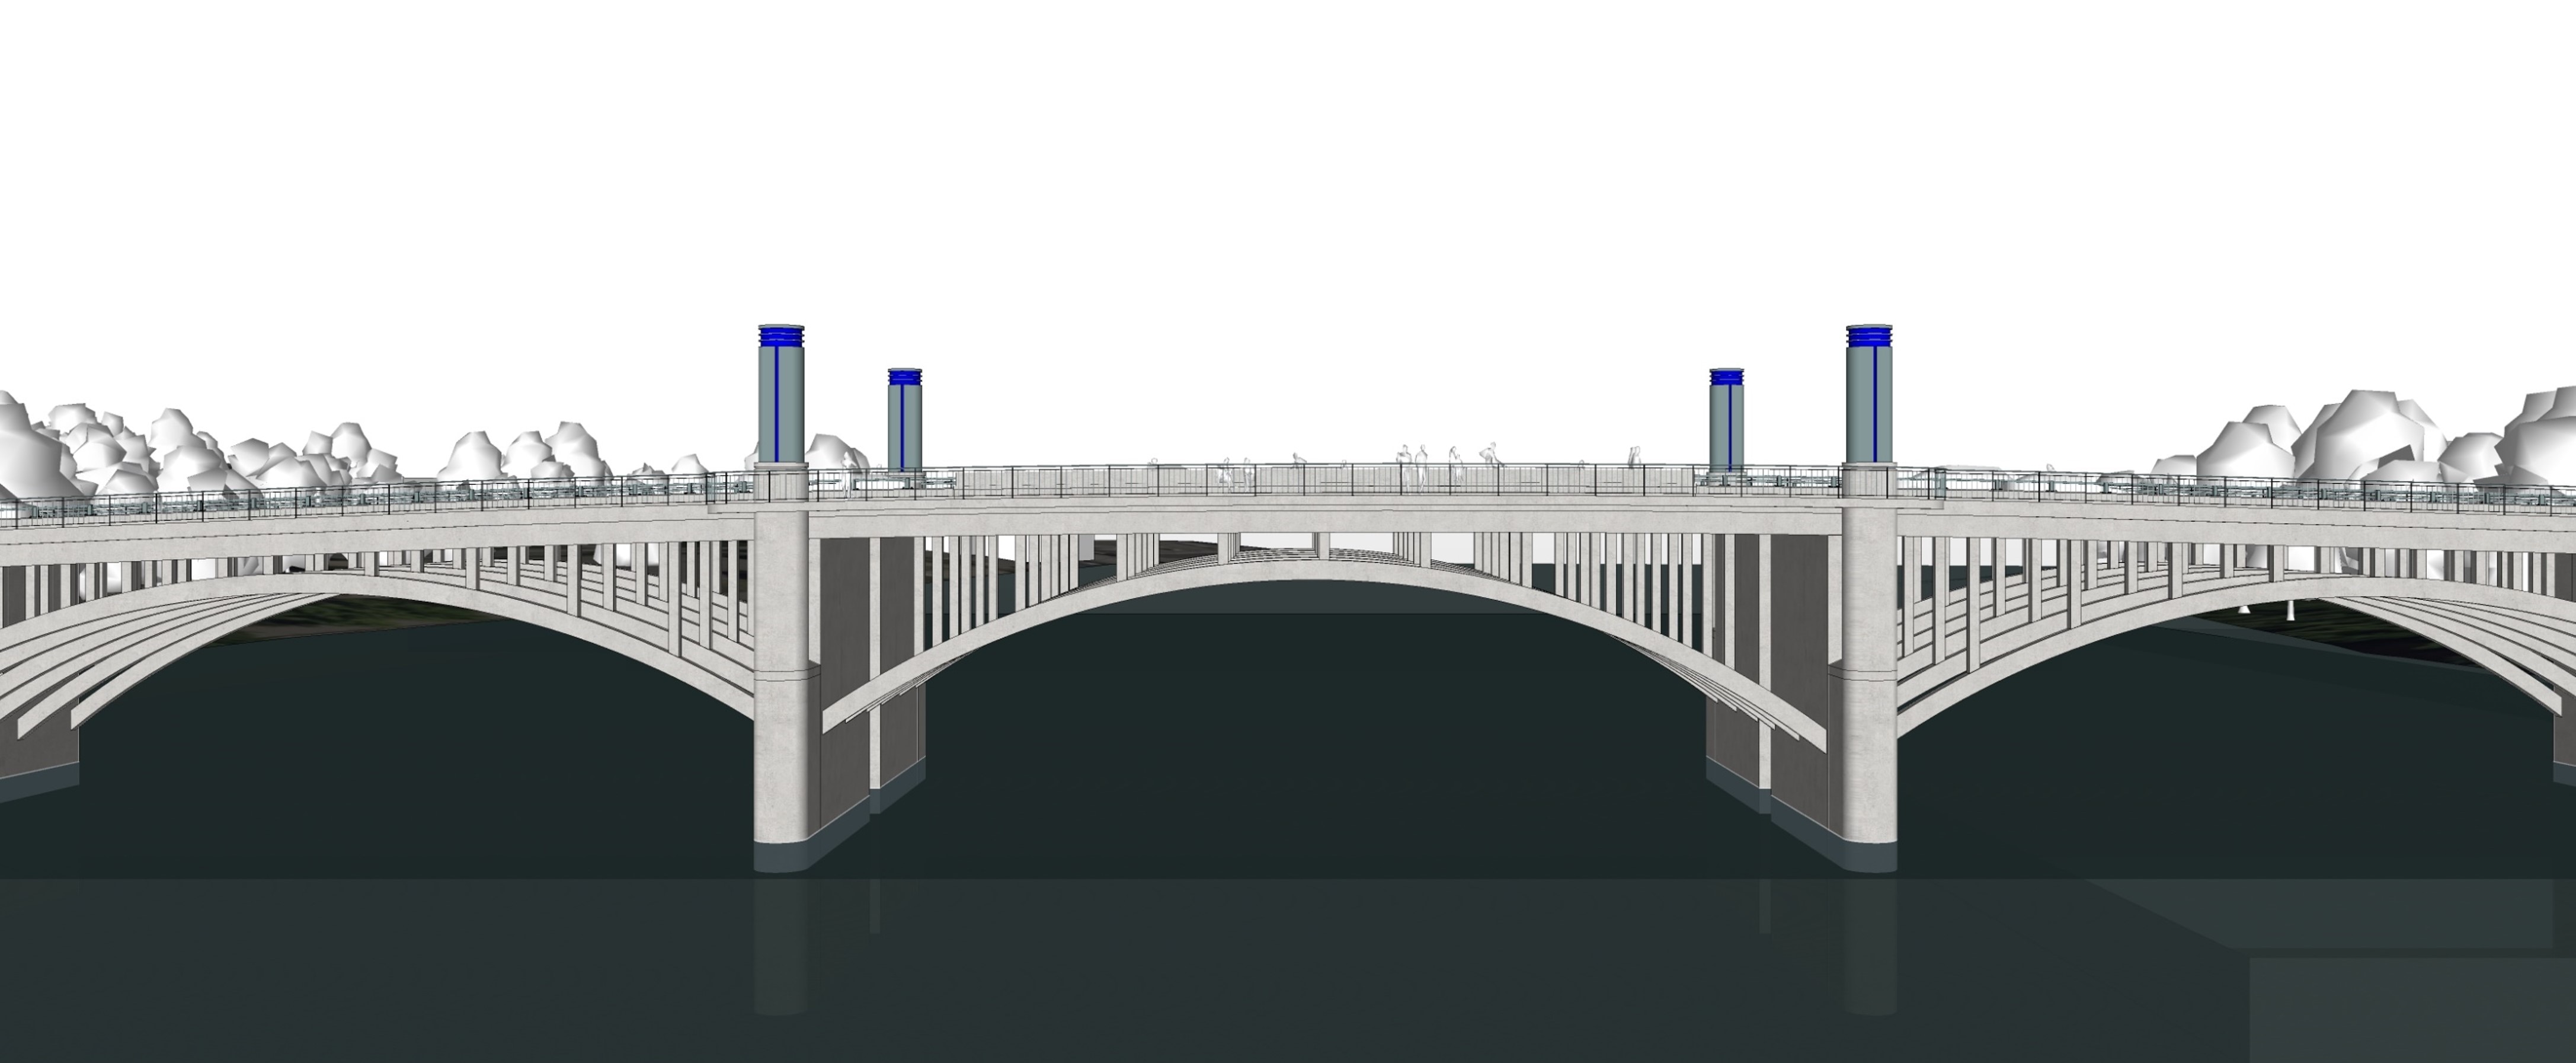 The preferred concept for the new bridge as shown by MassDOT at the public information meeting on November 15, 2023.  The new bridge includes an arched appearance to refer back to the existing structure and beacons above the roadway deck to provide architectural character.